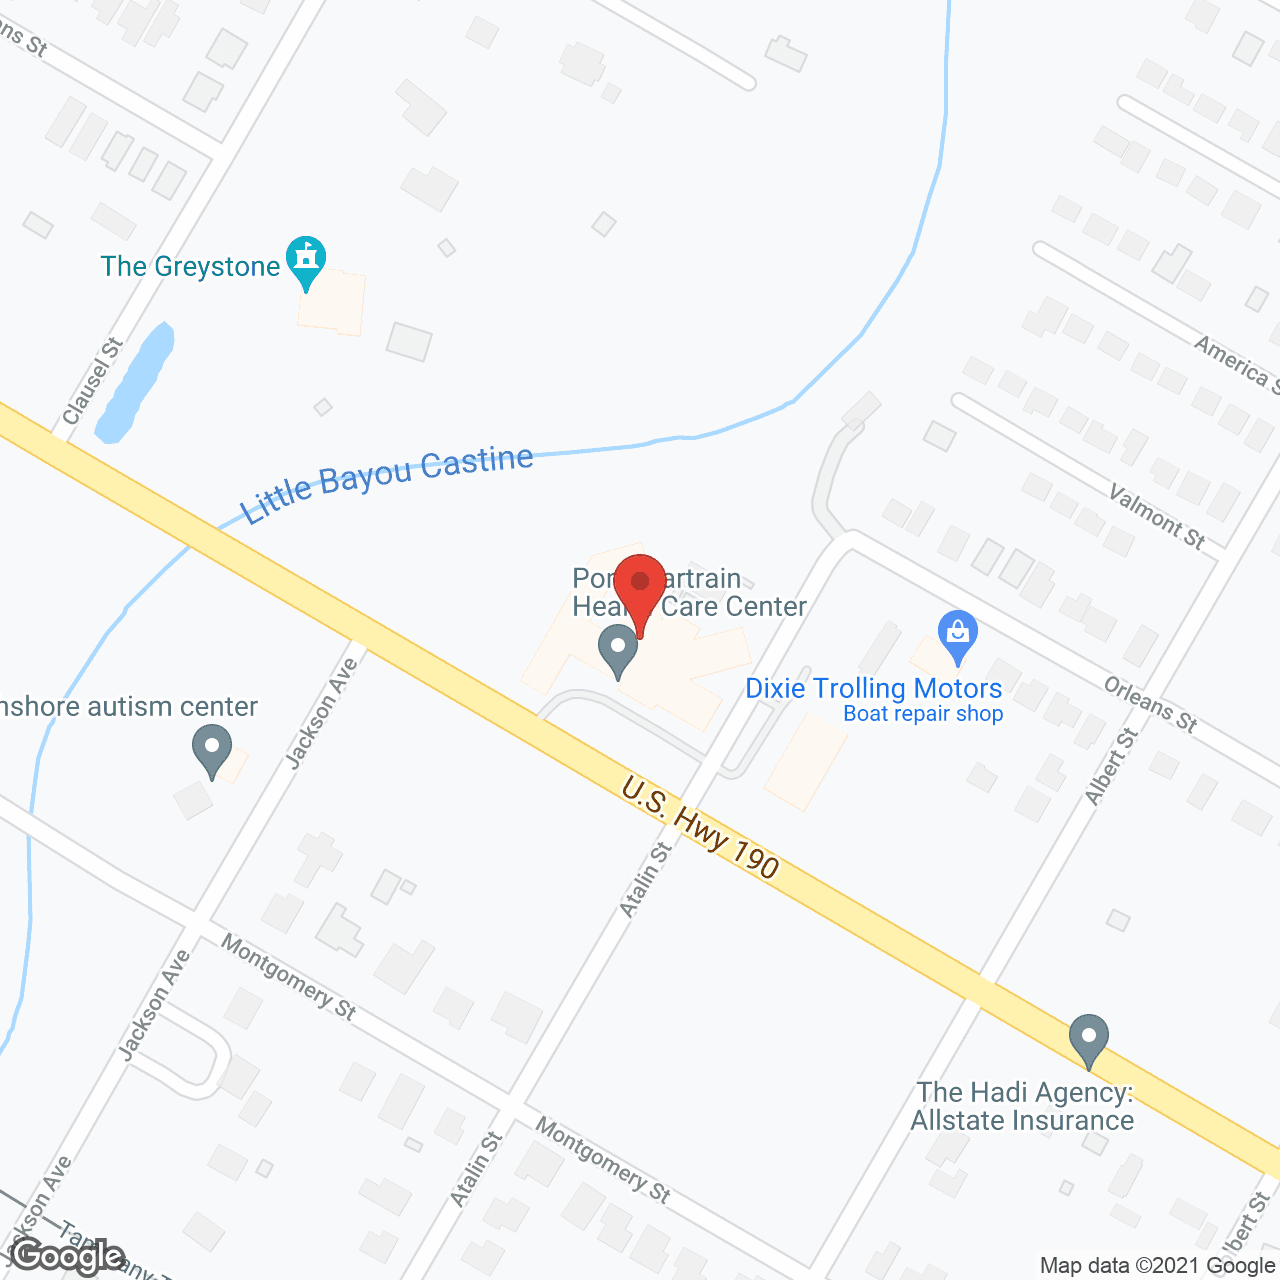 Pontchartrain Health Care Ctr in google map